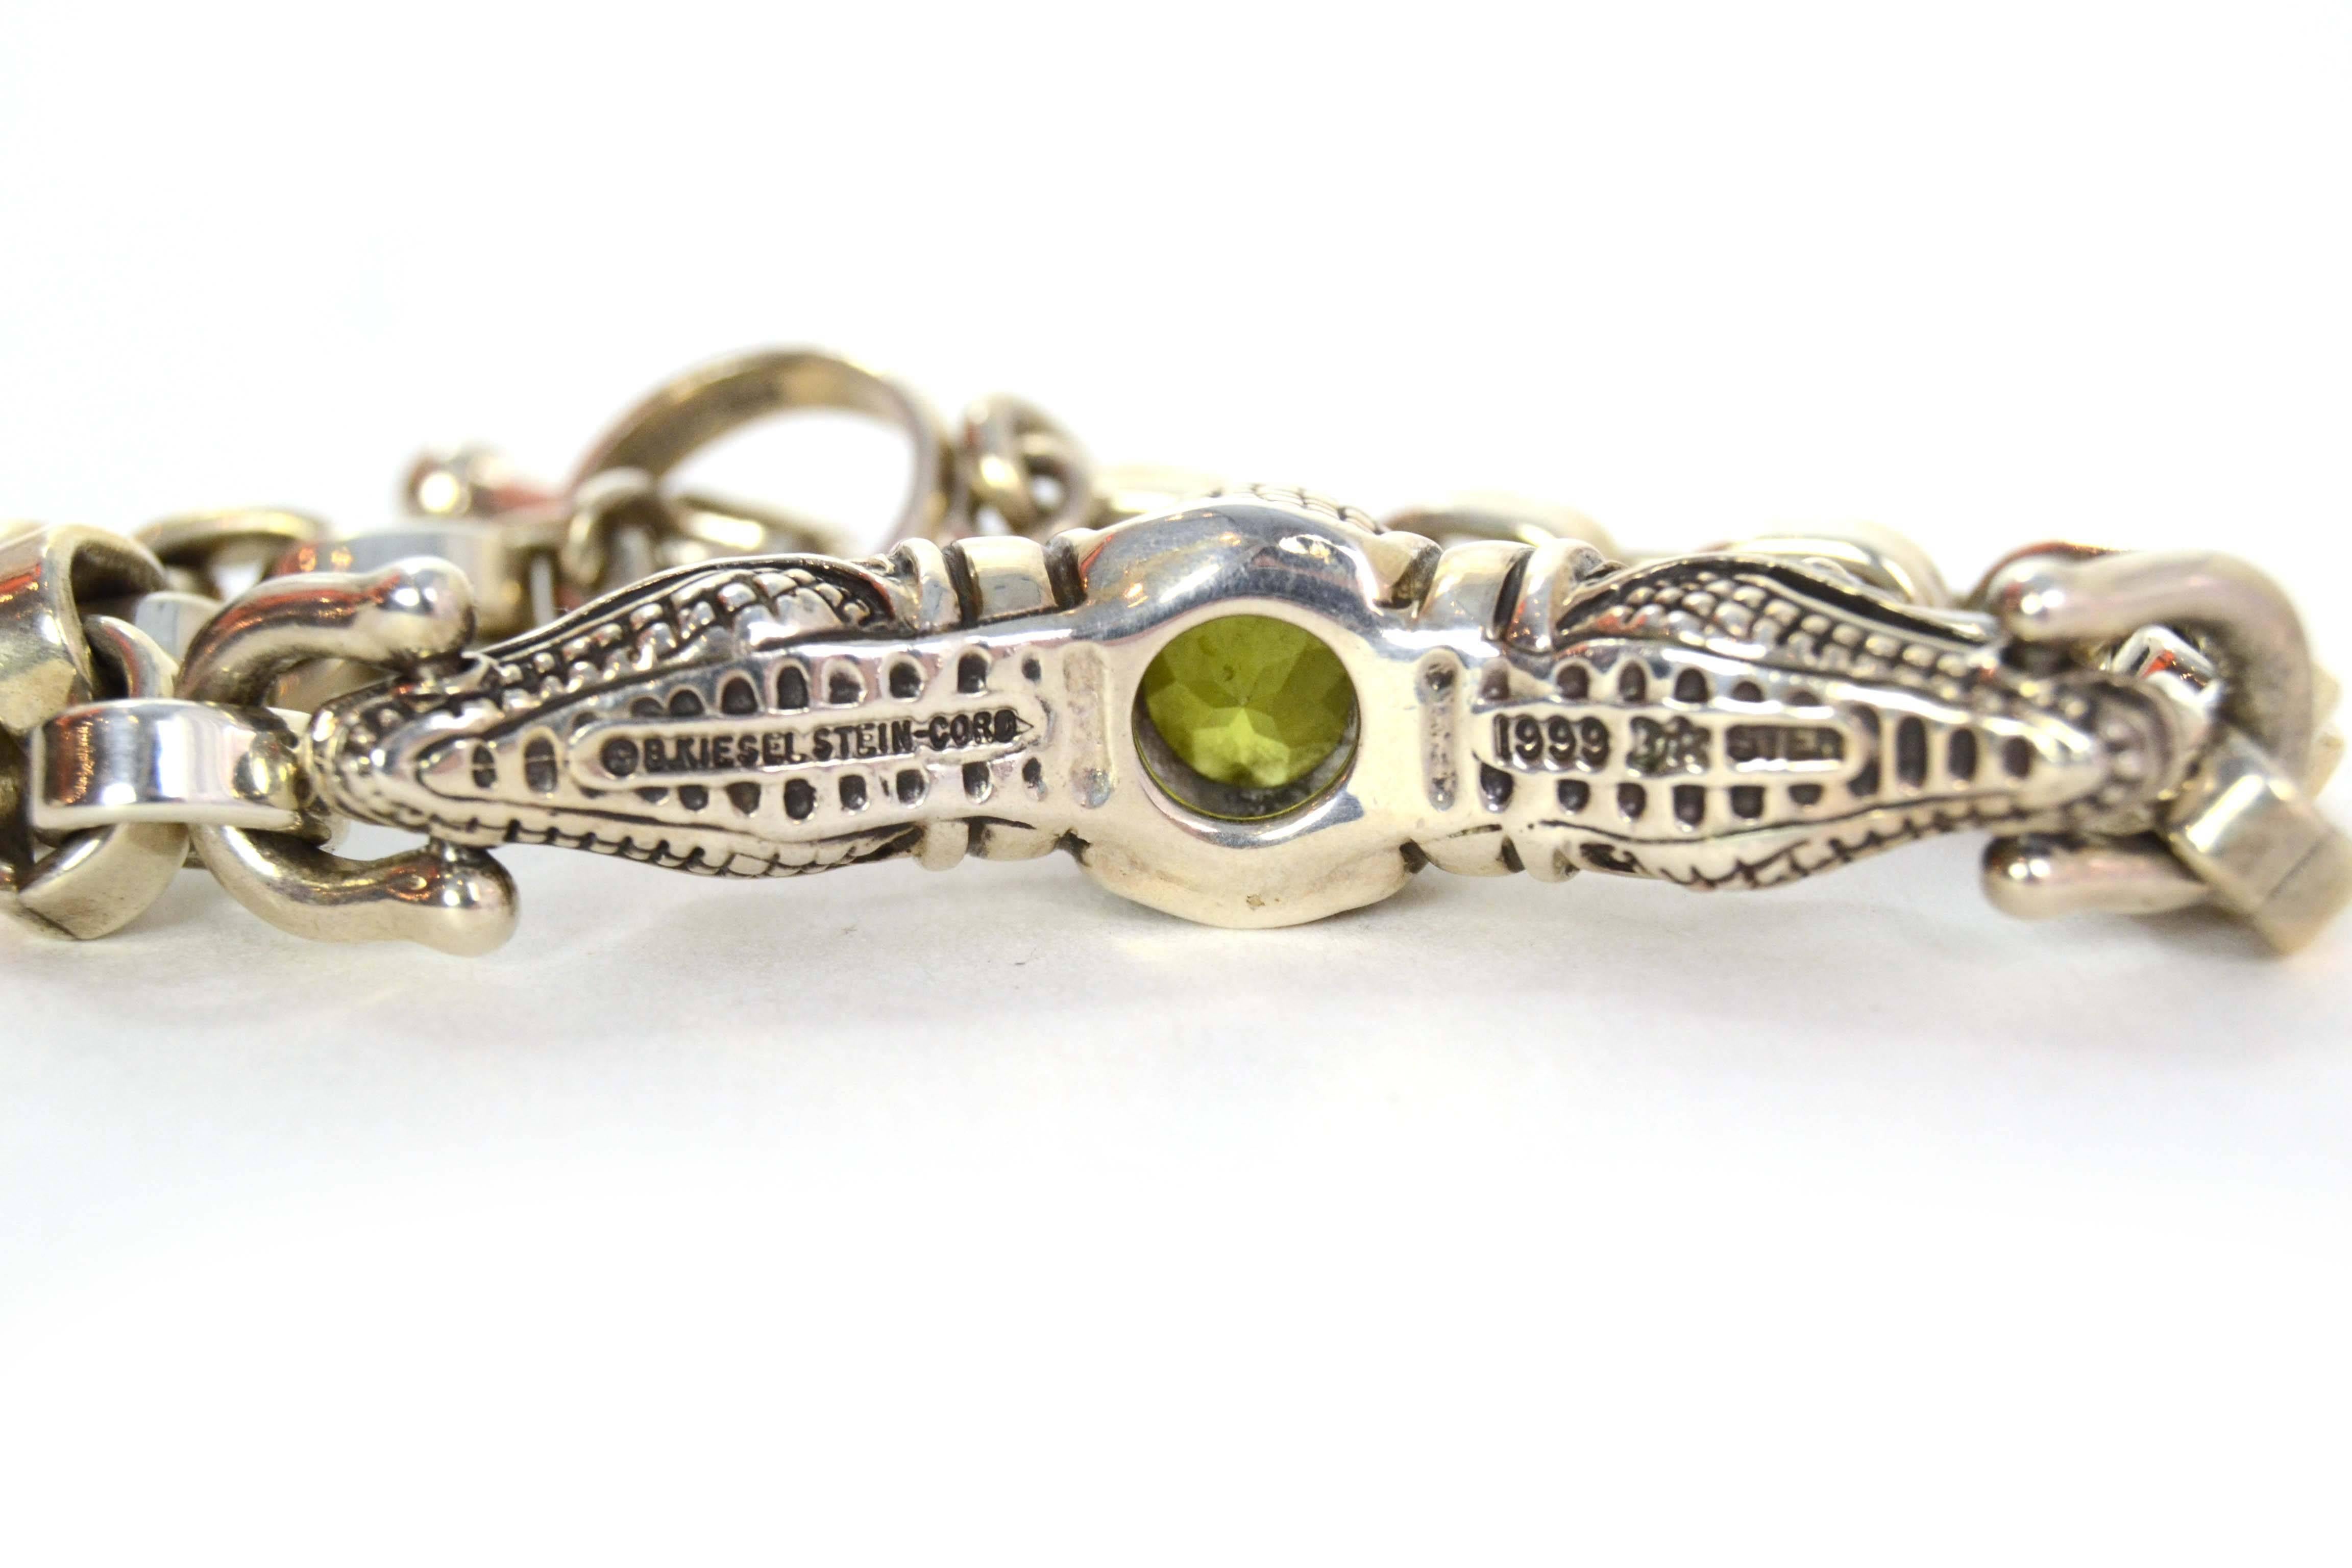 Barry Kieselstein-Cord Sterling Chain Link Gator Head Bracelet With Peridot Stone

    Made In: U.S.A

    Year of Production: 1999

    Color: Silver, green

    Materials: Sterling silver, Peridot

    Closure/Opening: Toggle closure

